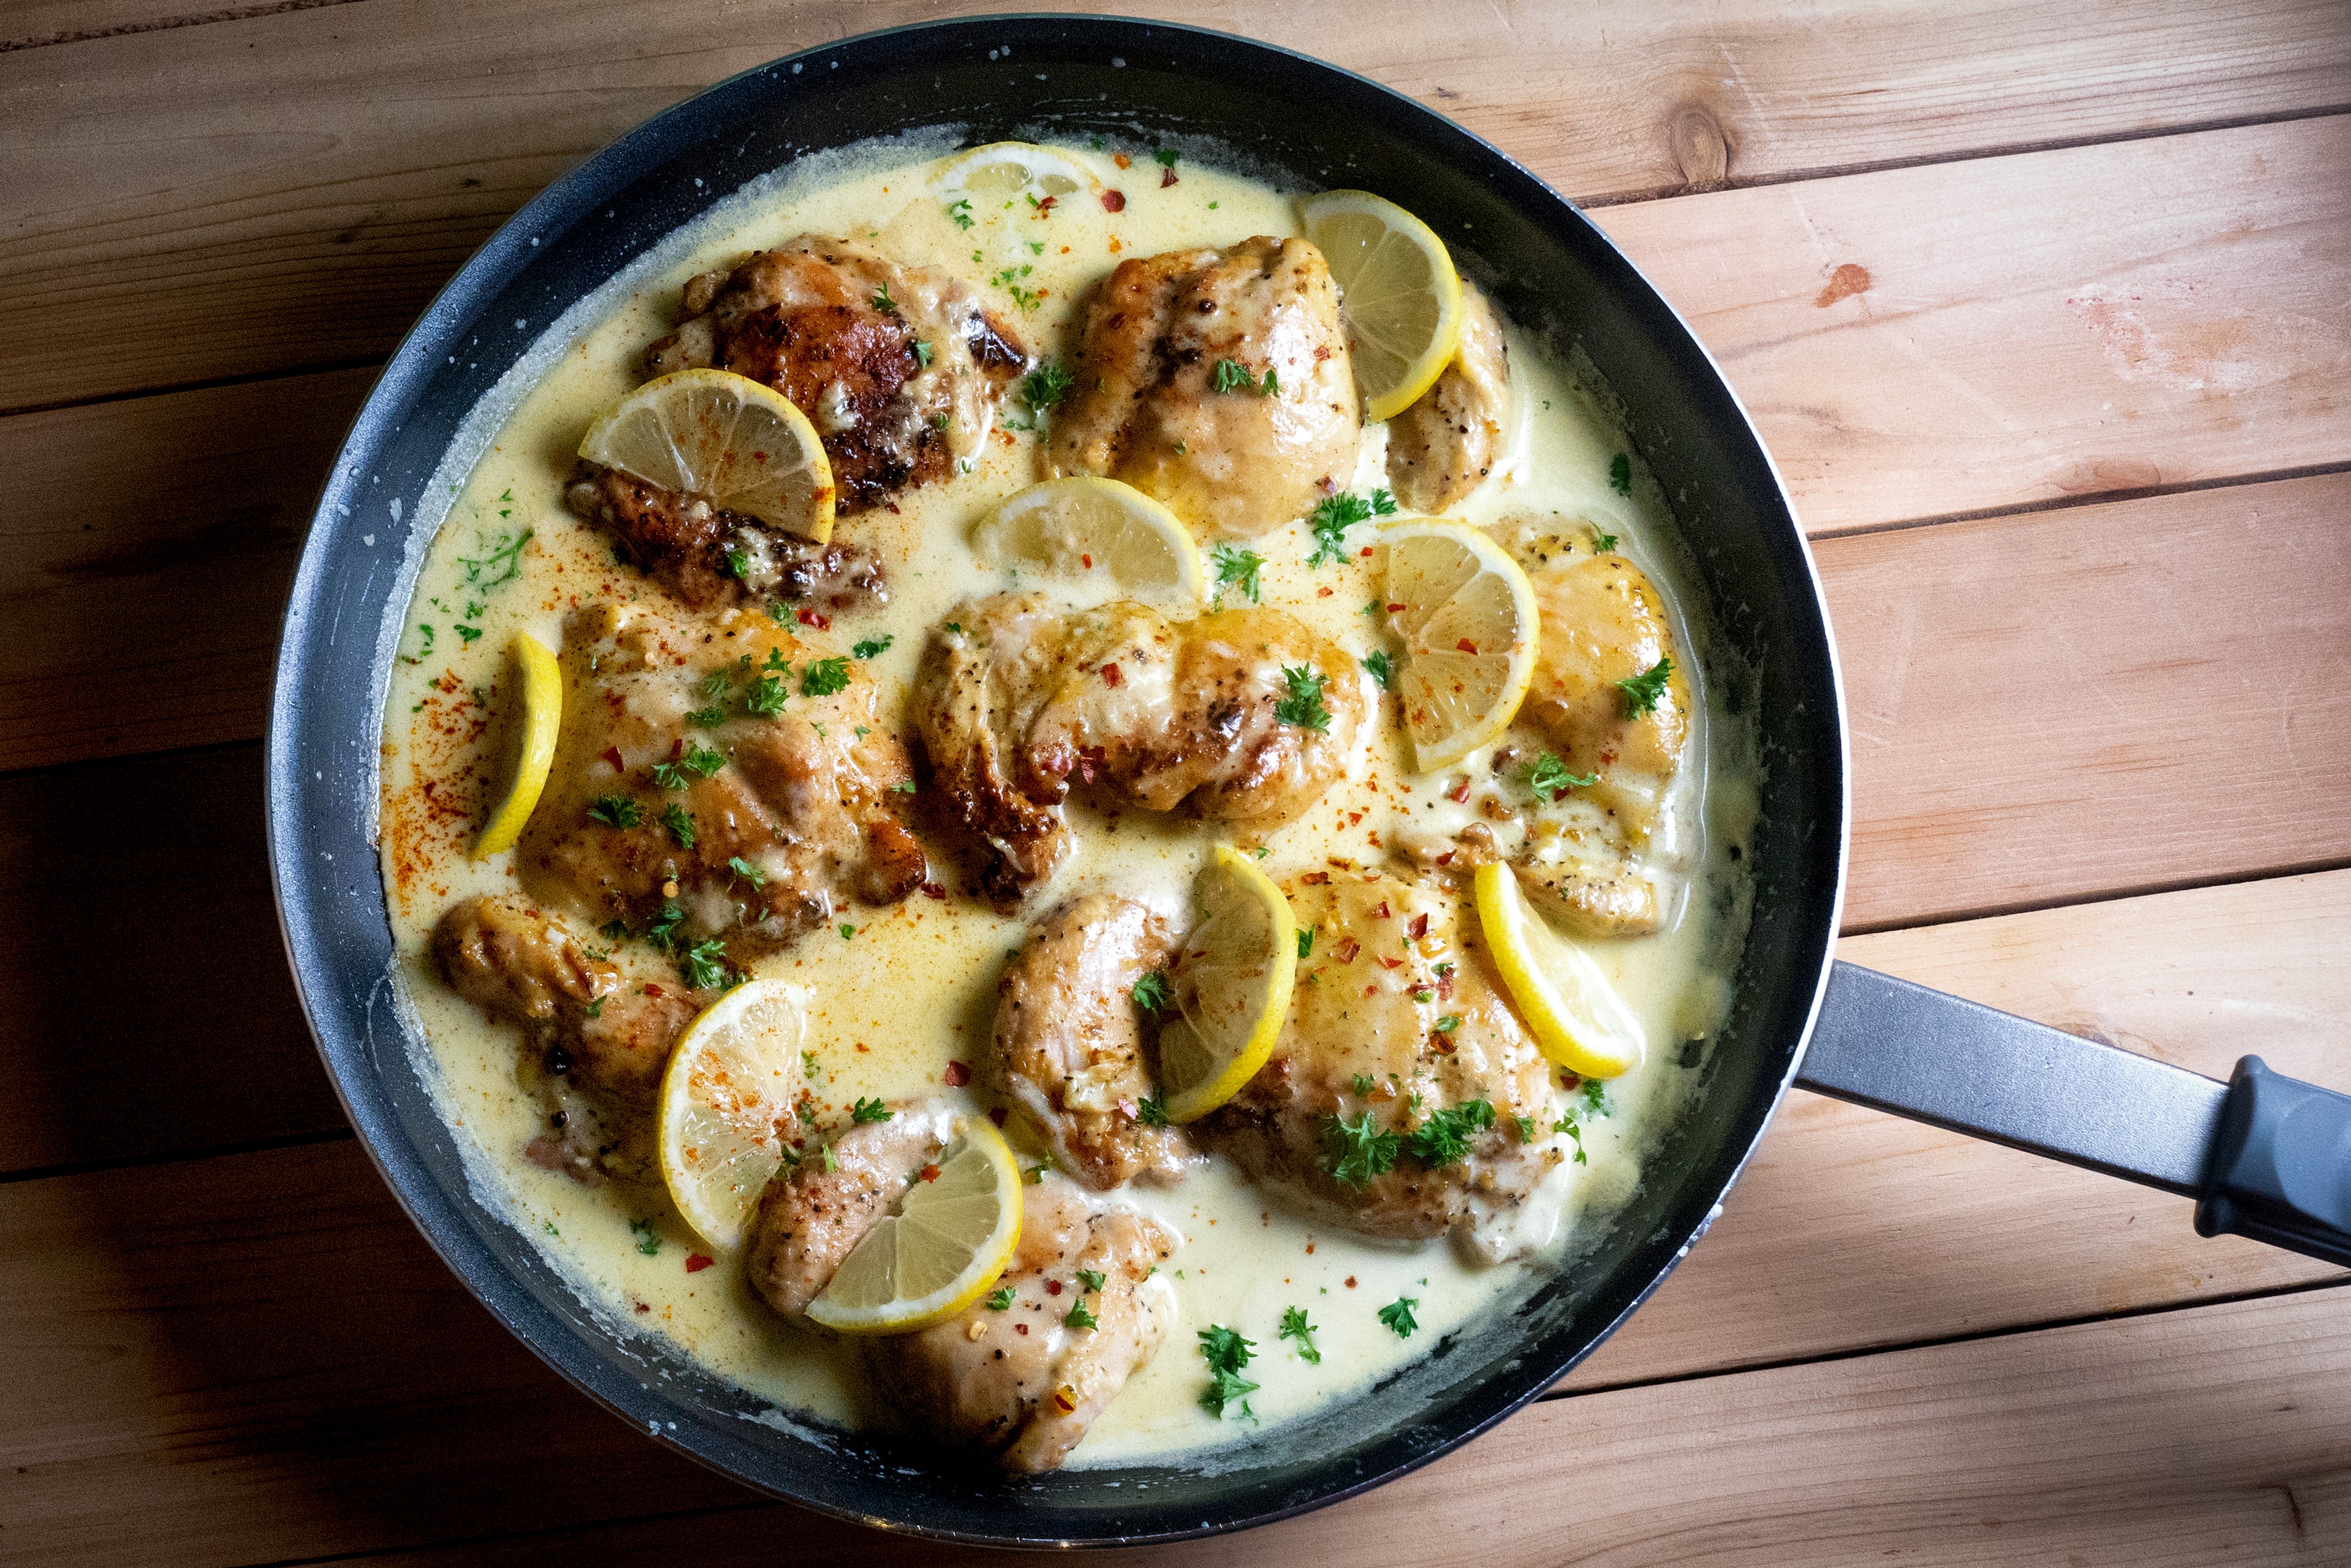 Yotam Ottolenghi’s double lemon chicken is a Middle Eastern take on a classic